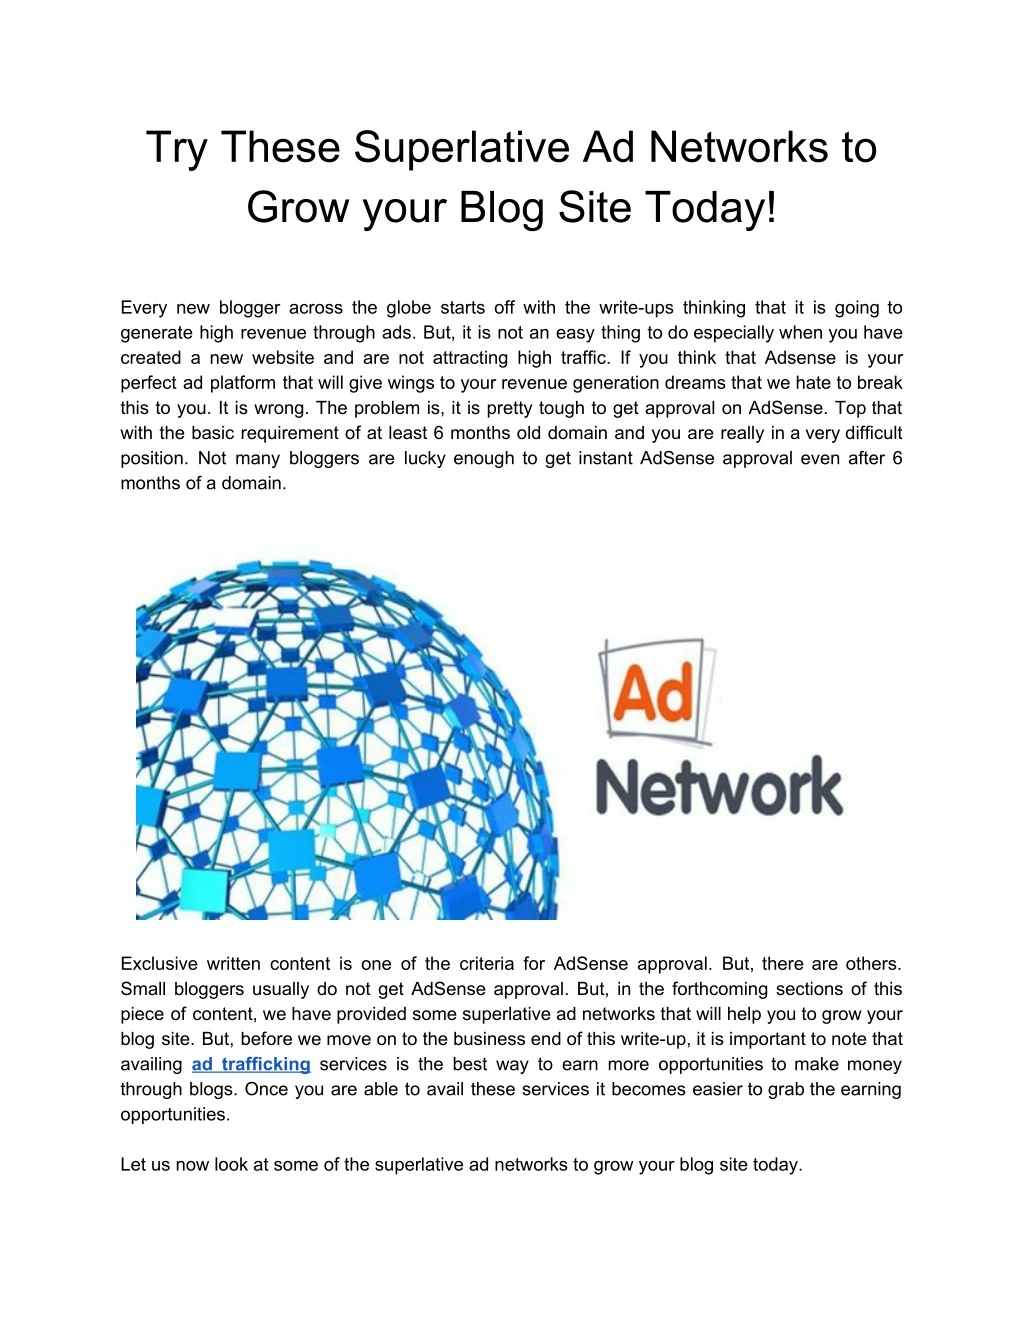 try these superlative ad networks to grow your